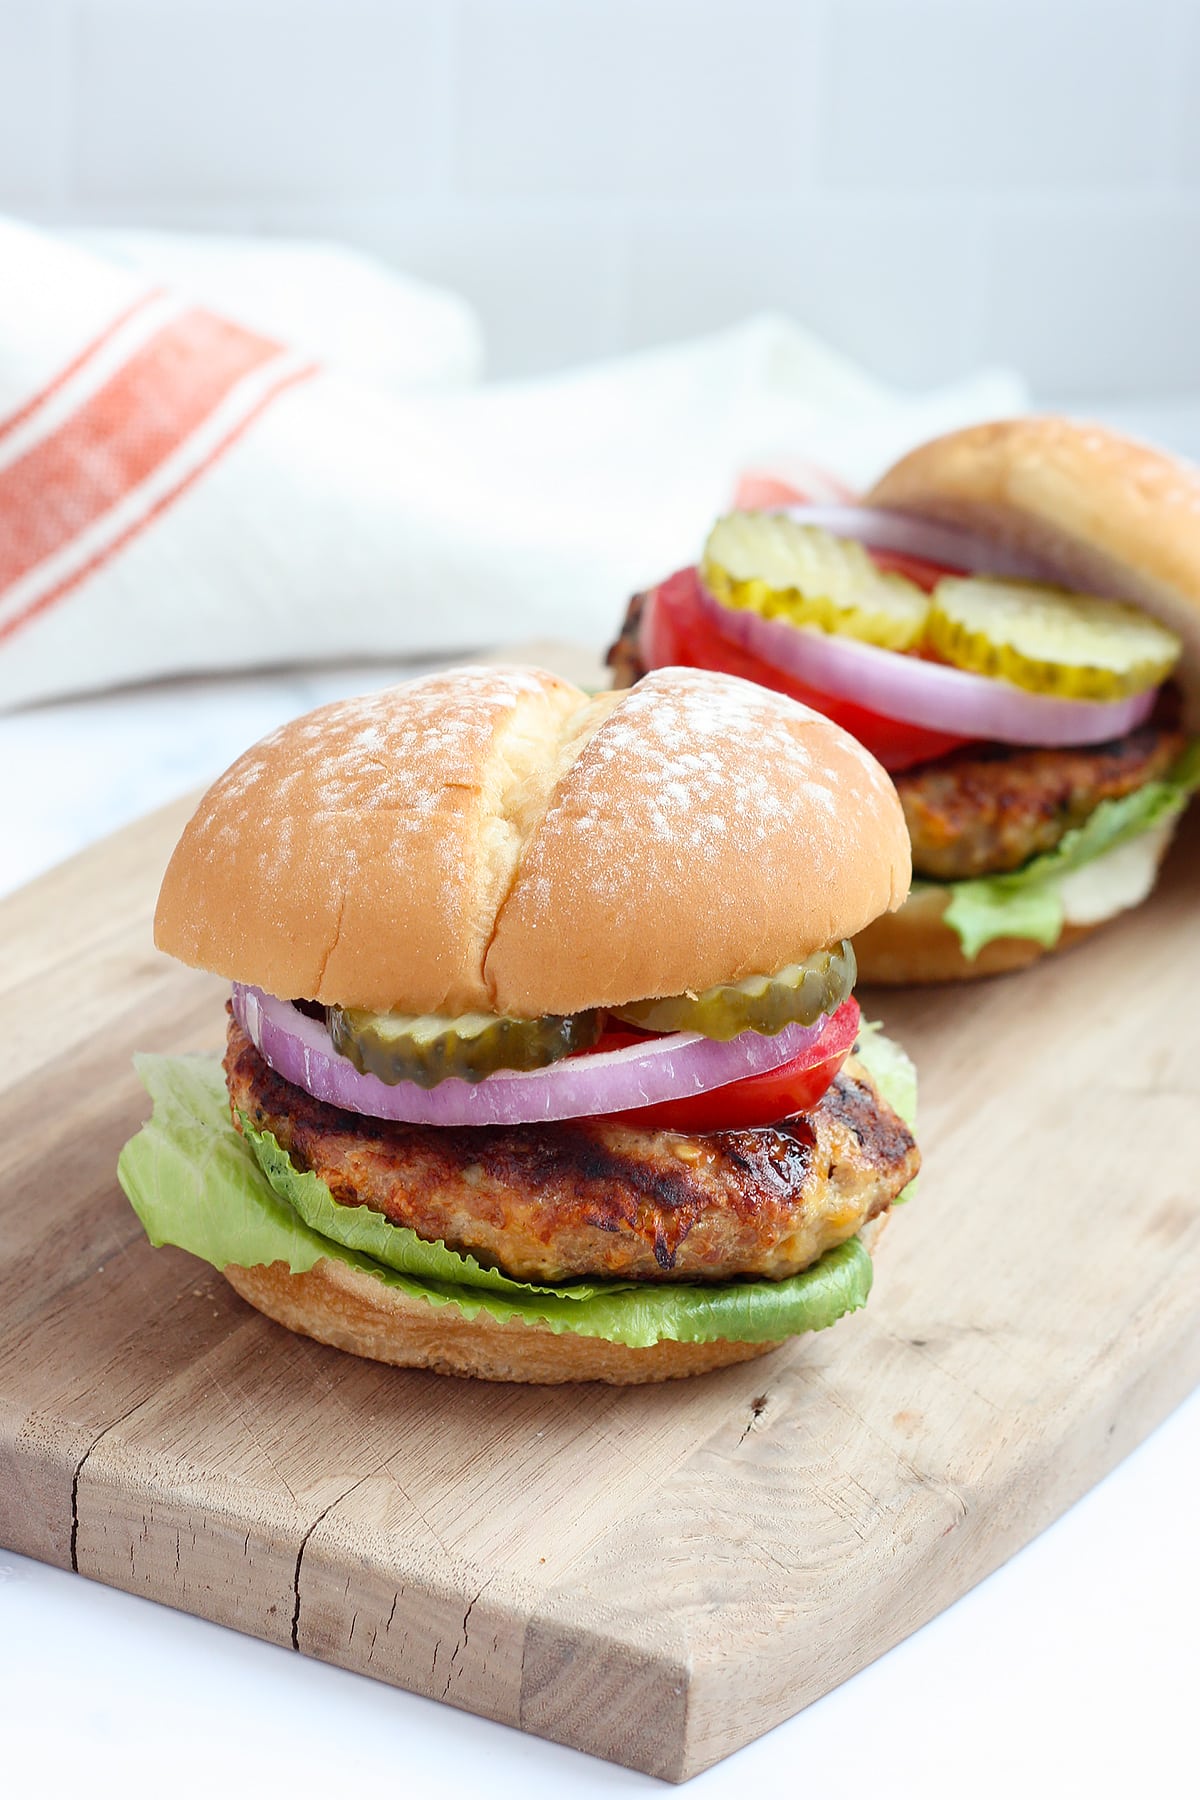 Juicy turkey burger with lettuce, tomato and onion on a wooden cutting board.